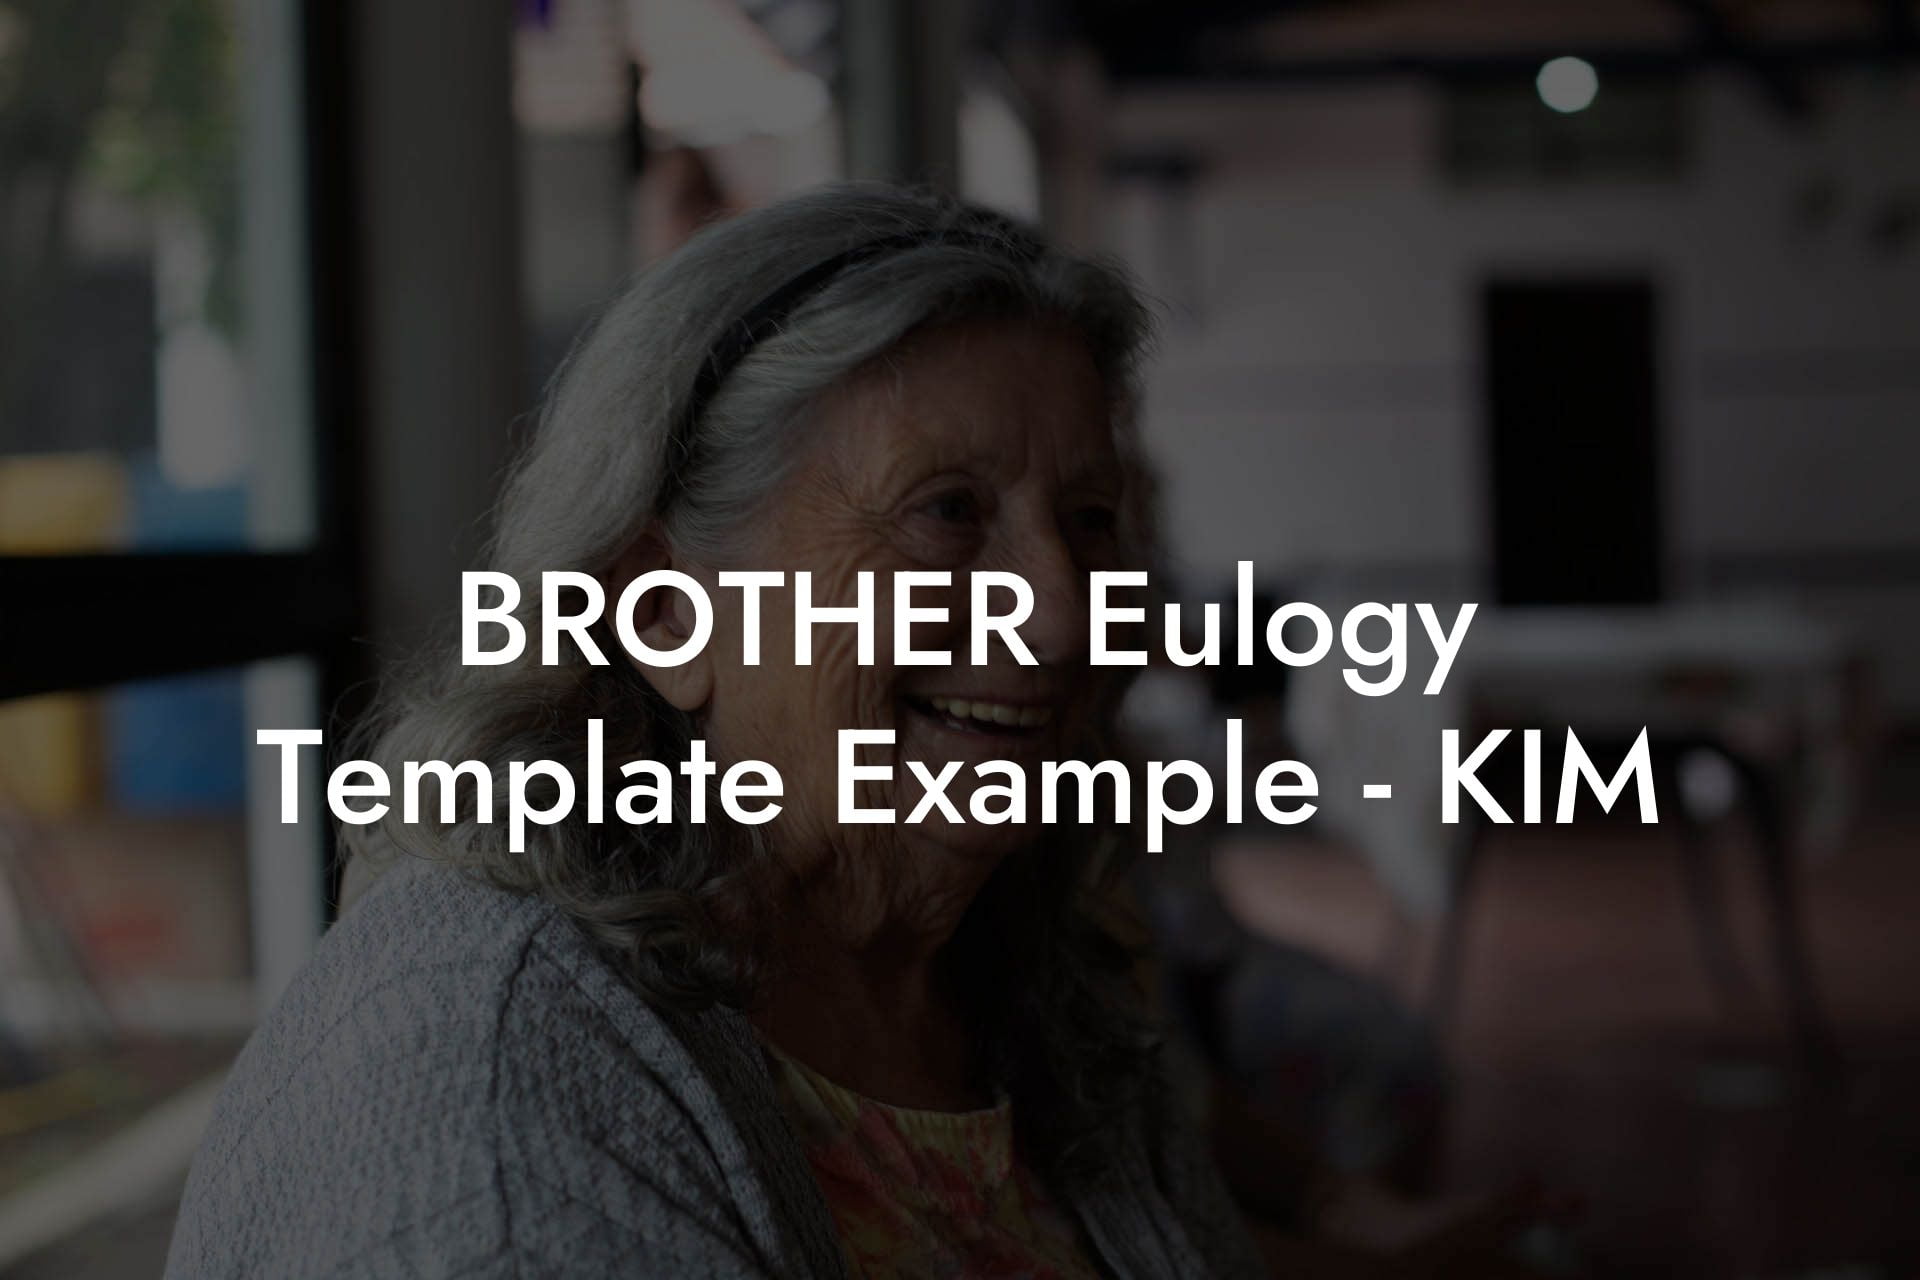 BROTHER Eulogy Template Example - KIM